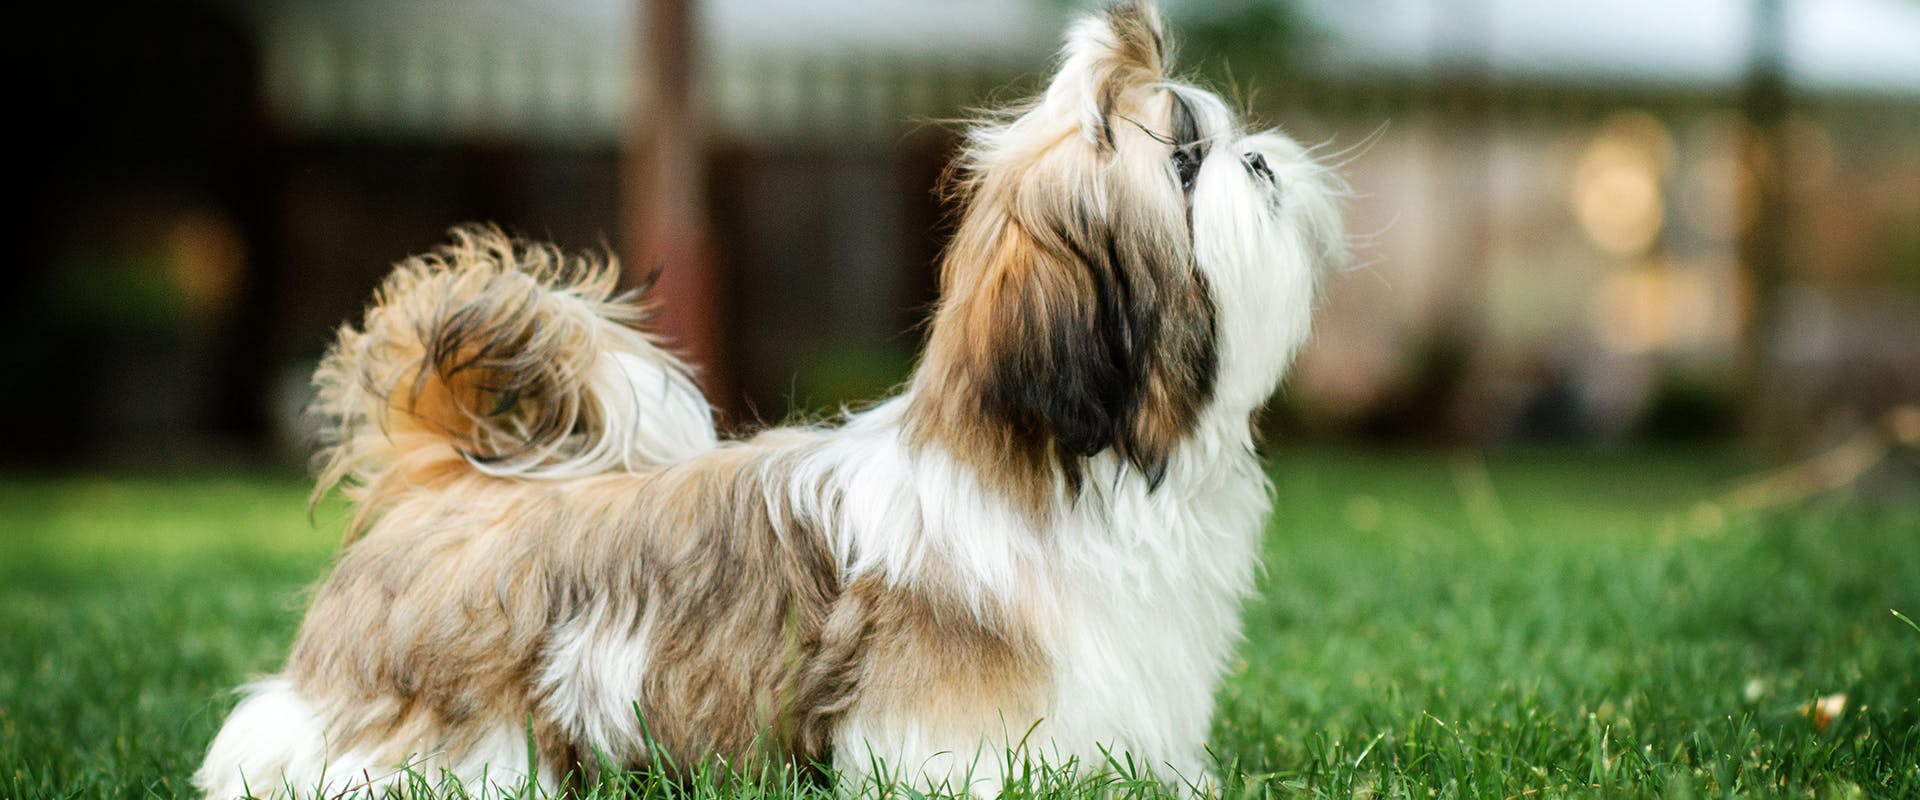 A Shih Tzu dog standing to the side